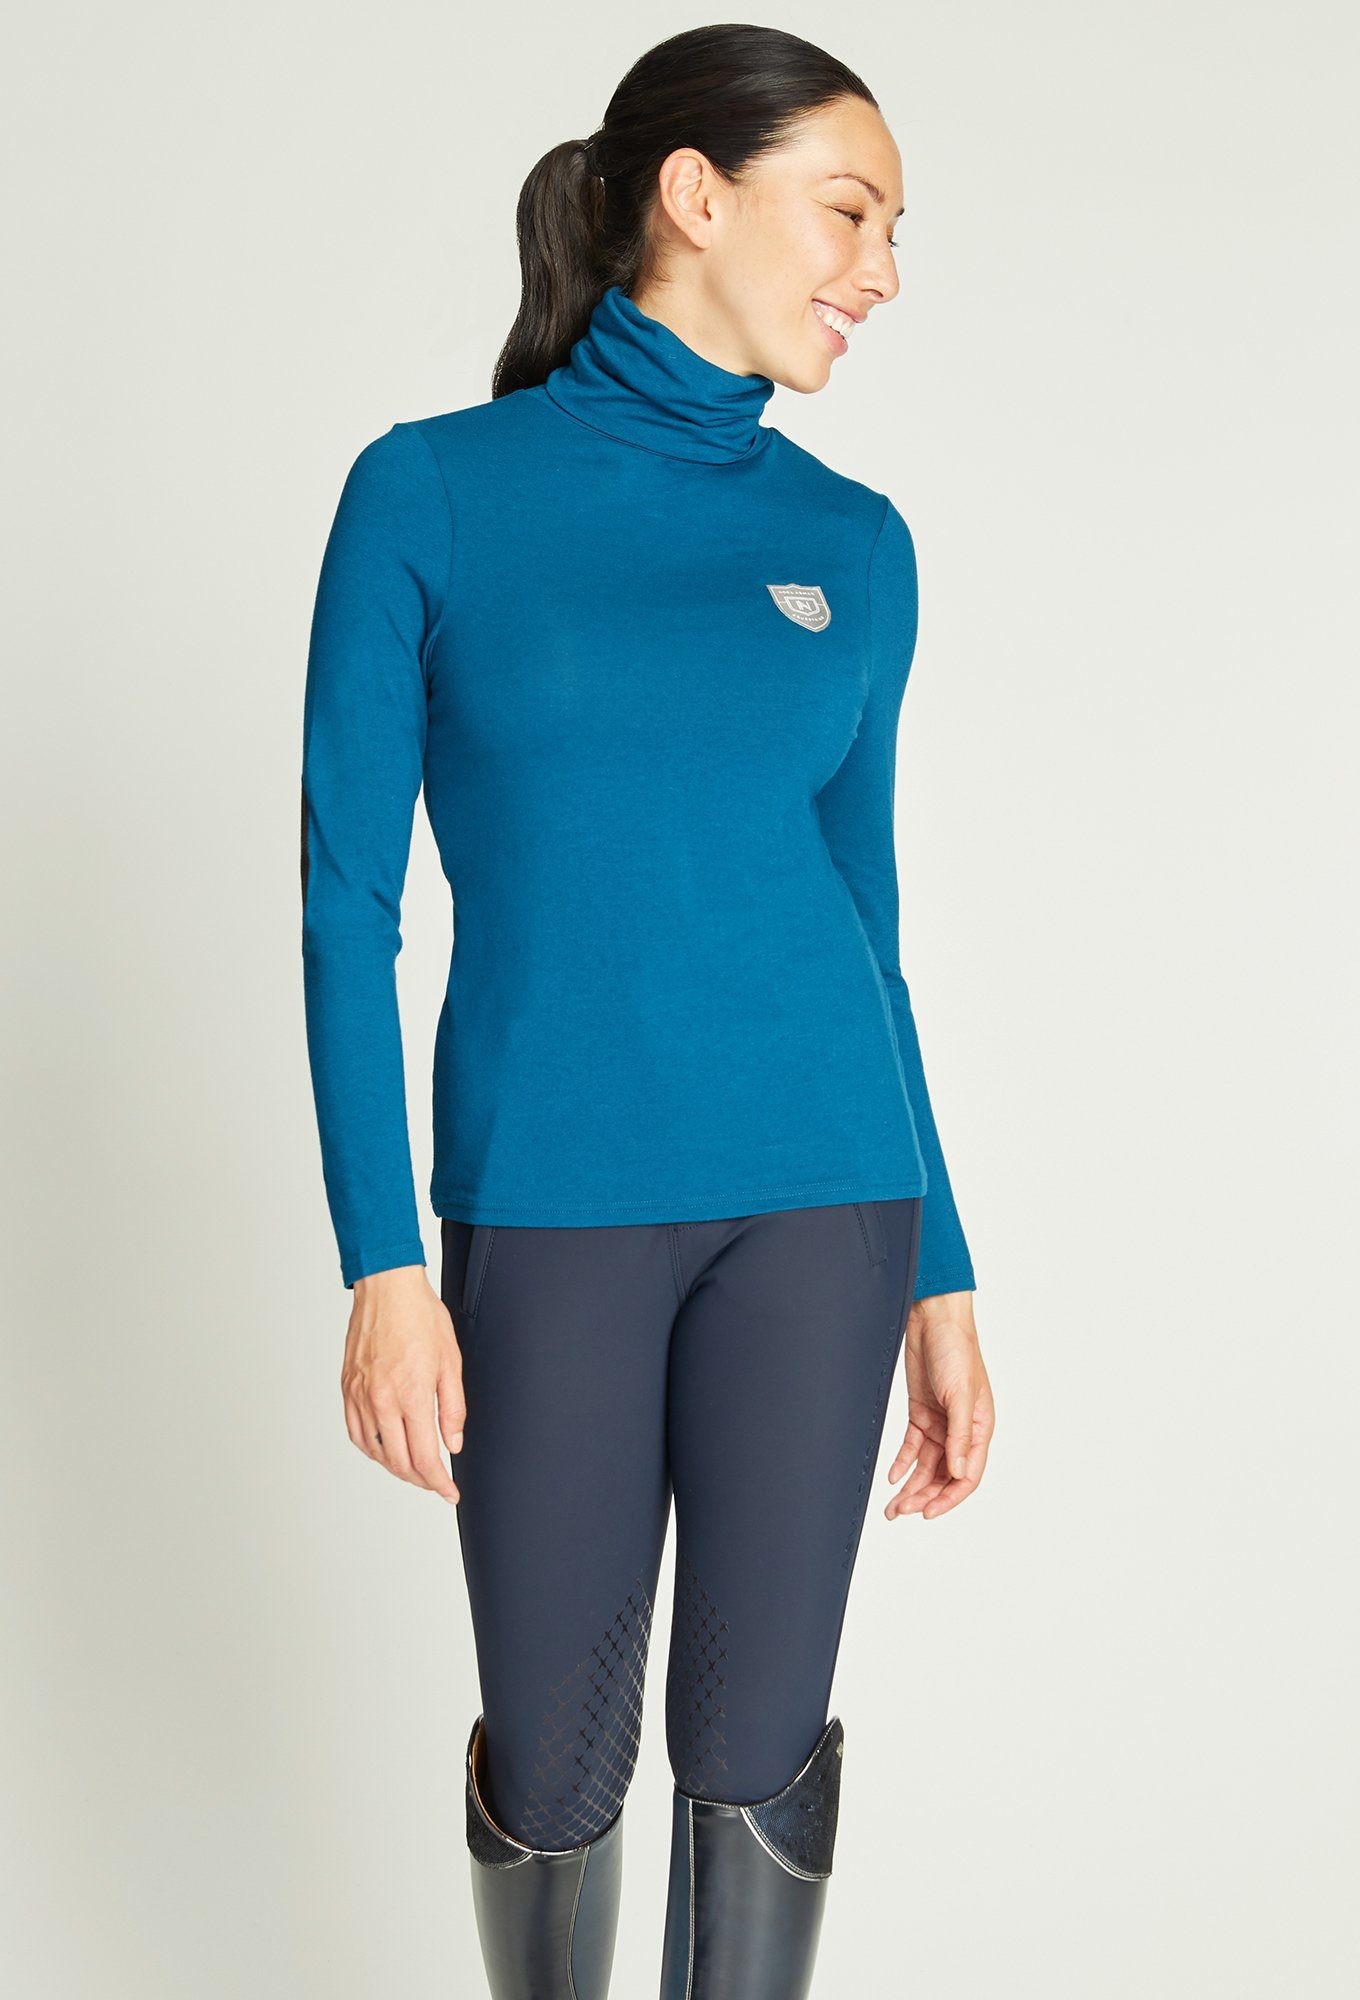 Woman wearing blue riding top and navy riding leggings.